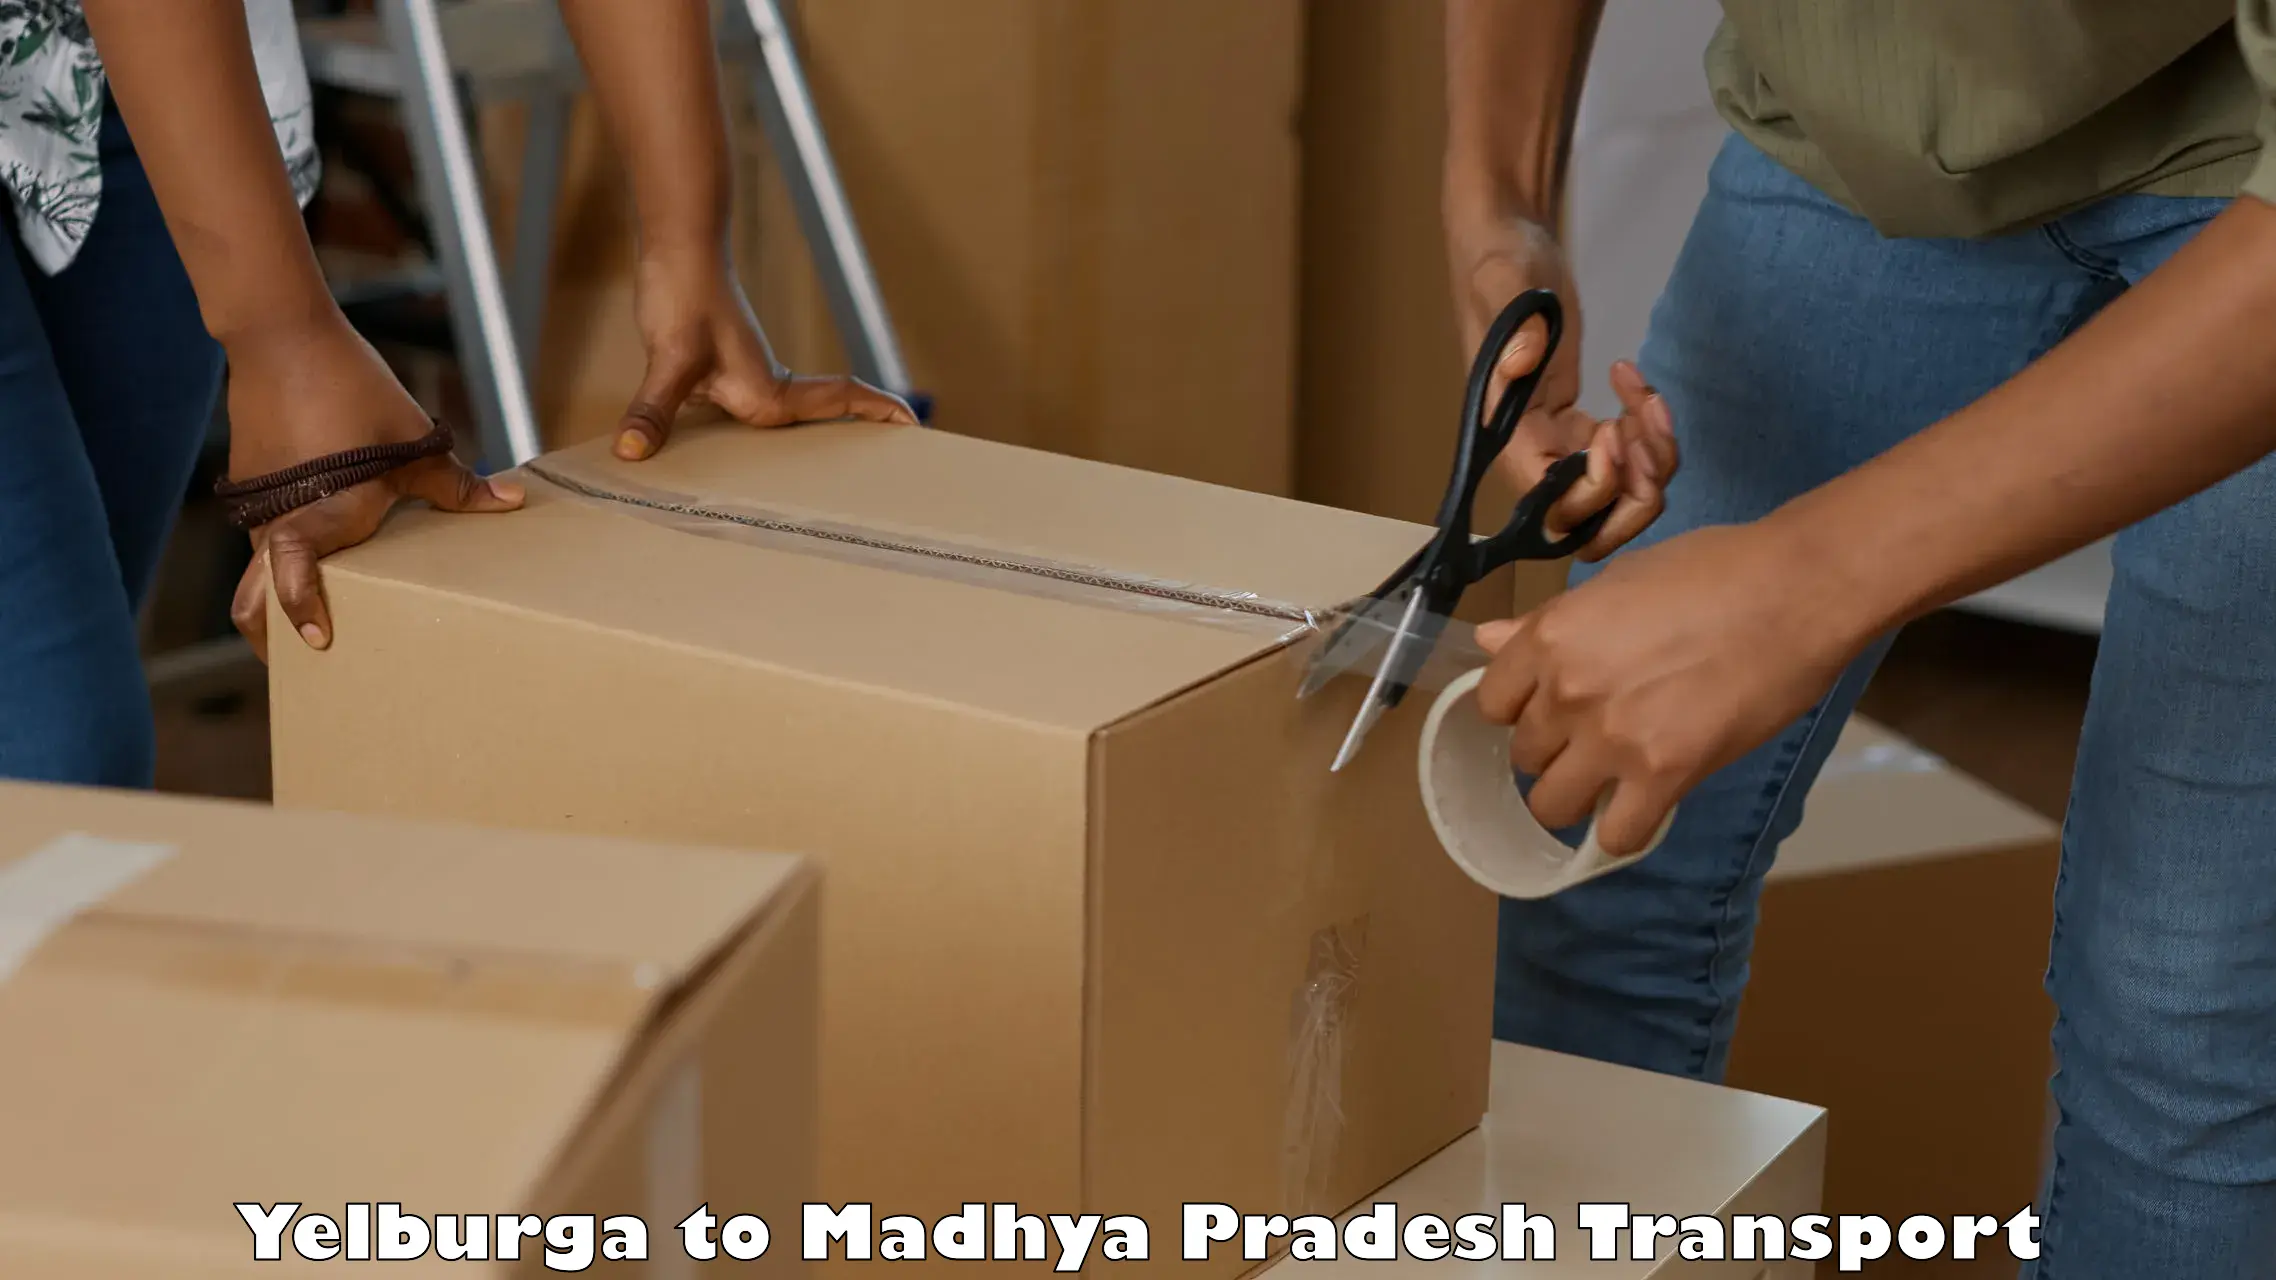 Package delivery services Yelburga to IIIT Bhopal